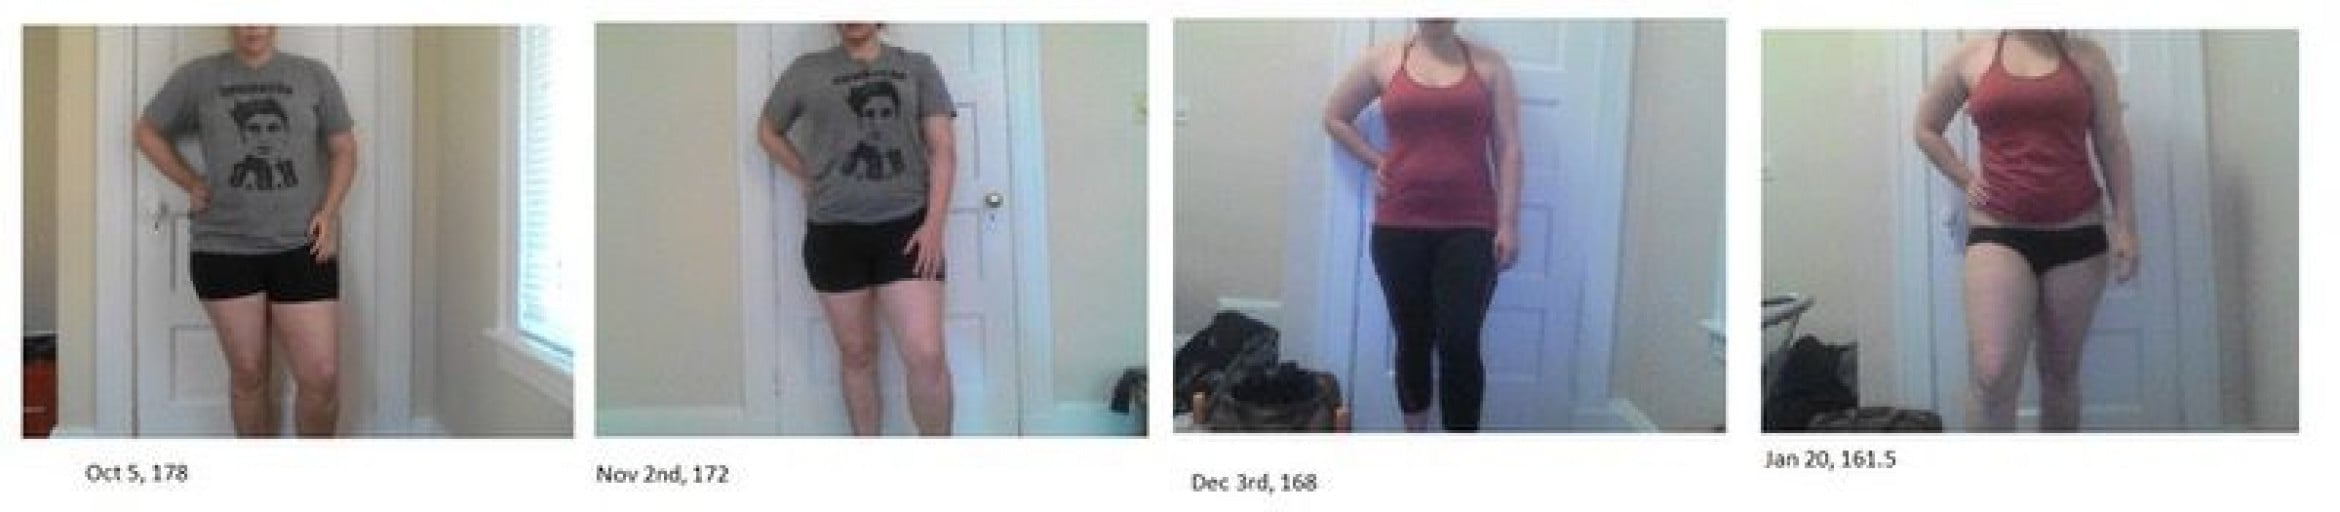 A picture of a 5'4" female showing a weight loss from 178 pounds to 161 pounds. A respectable loss of 17 pounds.